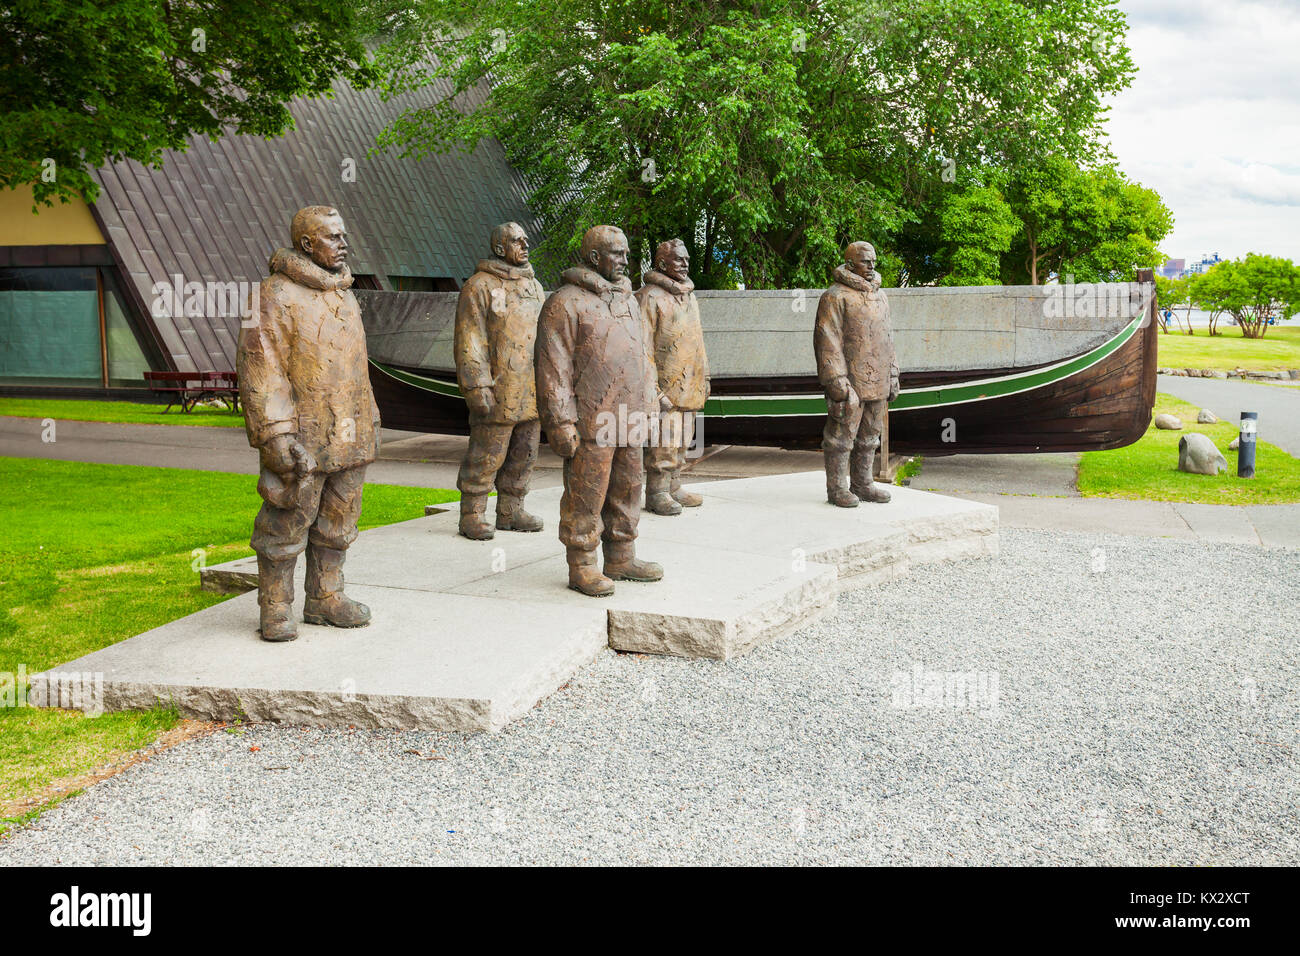 Roald Amundsen and his crew monuments at the Fram Museum, a museum of  Norwegian polar exploration. Fram Museum located on Bygdoy in Oslo, Norway  Stock Photo - Alamy